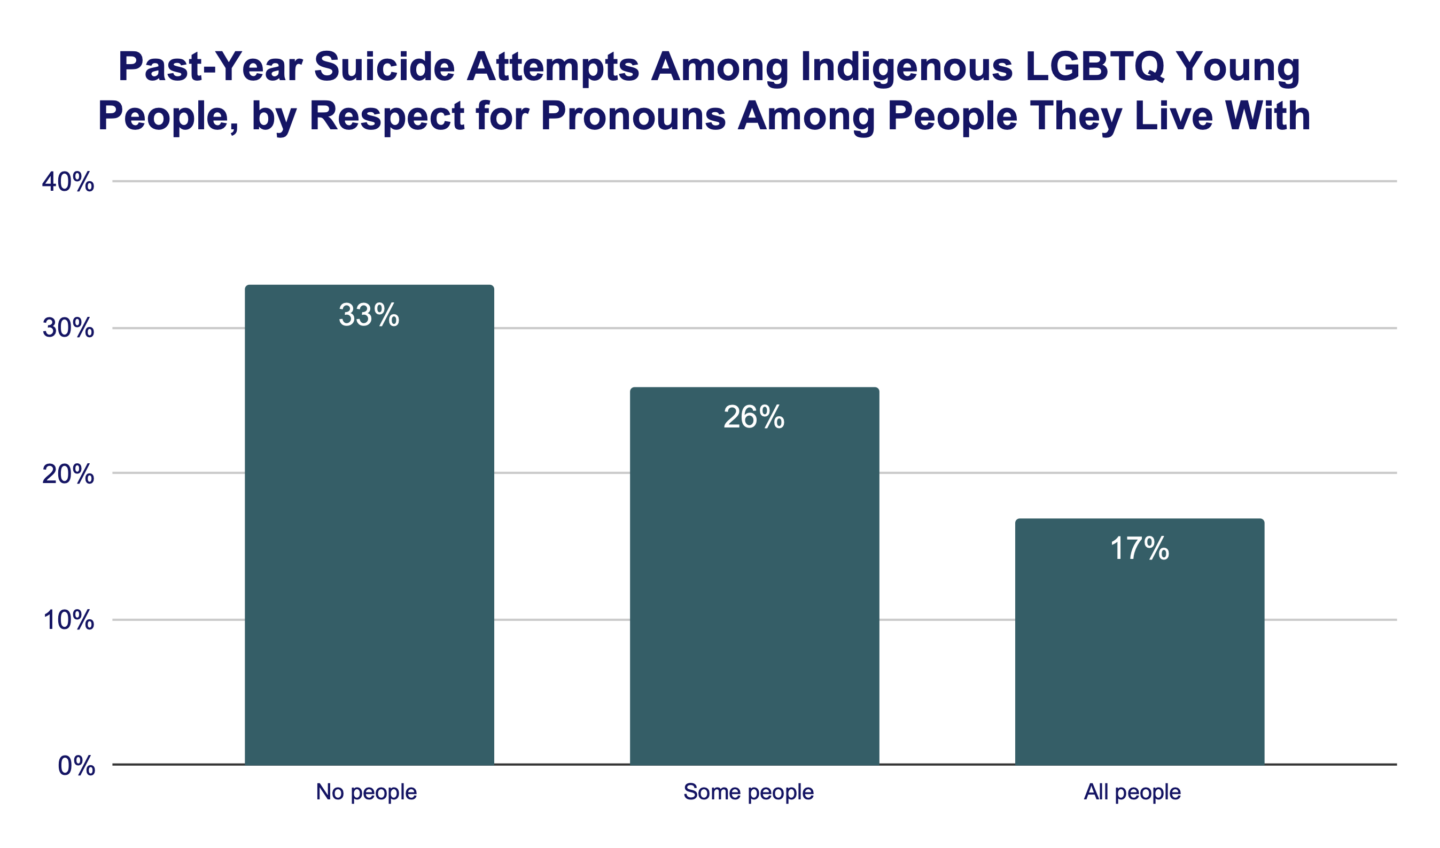 Past-Year Suicide Attempts Among Indigenous LGBTQ Young People by Respect for Pronouns Among People They Live With